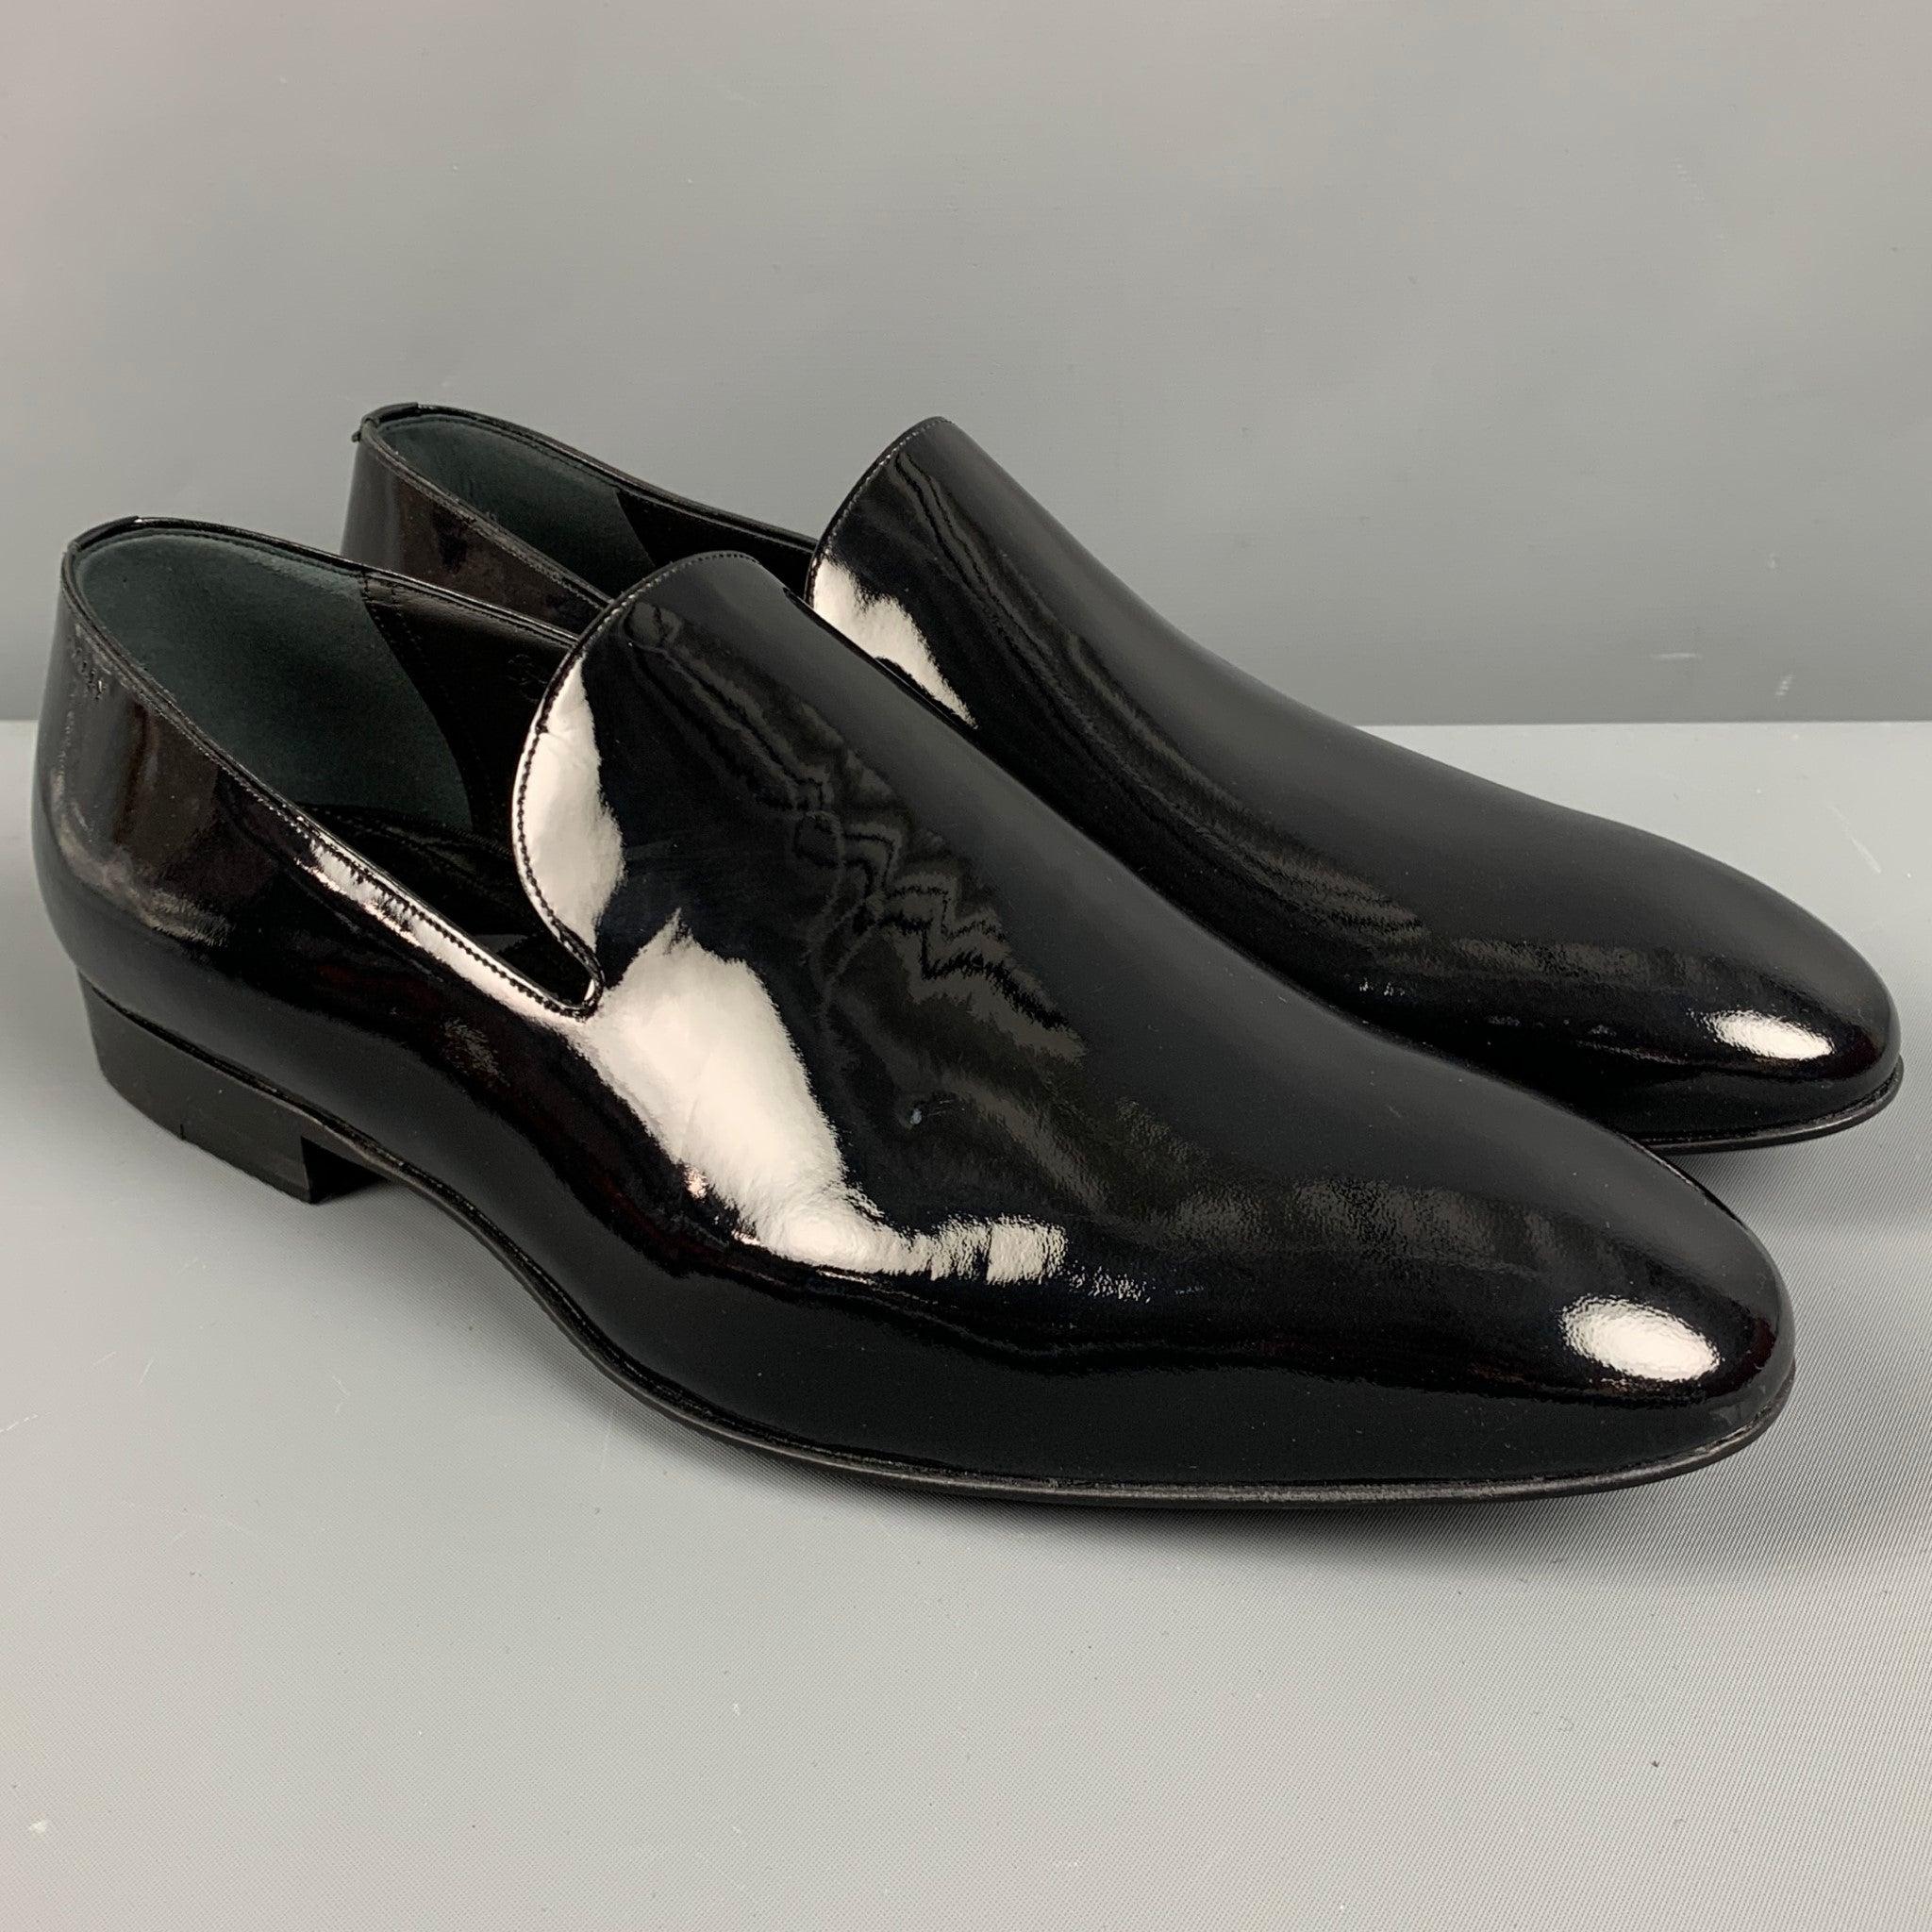 BALLY loafers
in a black patent leather fabric featuring a slip on style. Comes with box. Made in Switzerland.New with Box. 

Marked:   US 7.5Outsole:11.25 inches  x 3.5 in
  
  
 
Reference: 127682
Category: Loafers
More Details
    
Brand: 